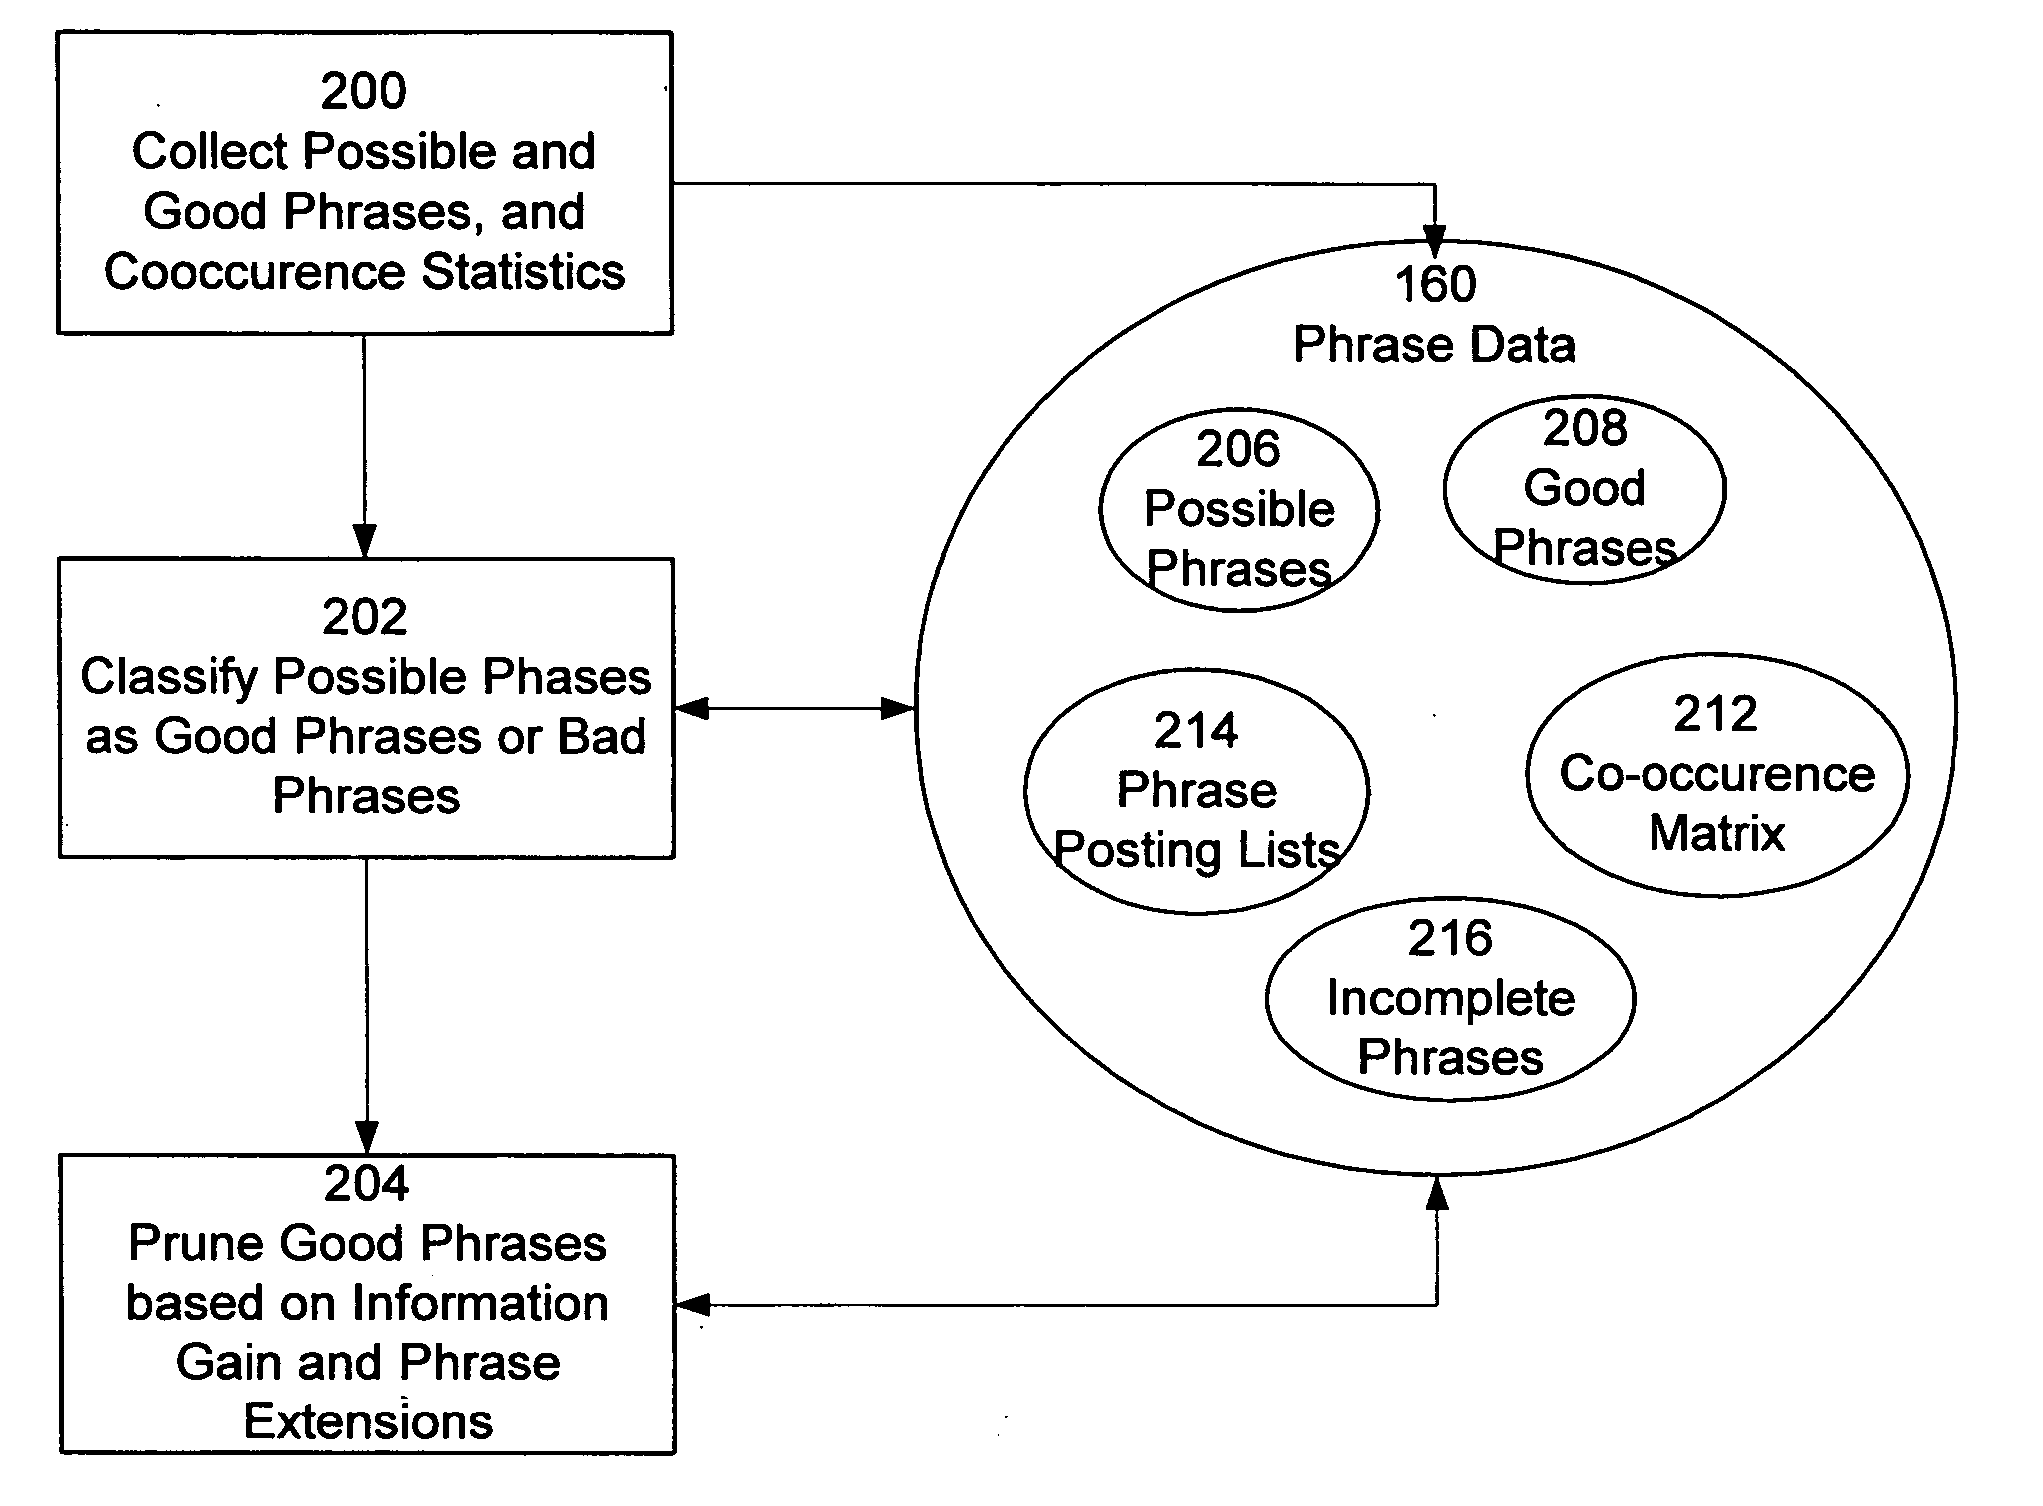 Phrase-based searching in an information retrieval system